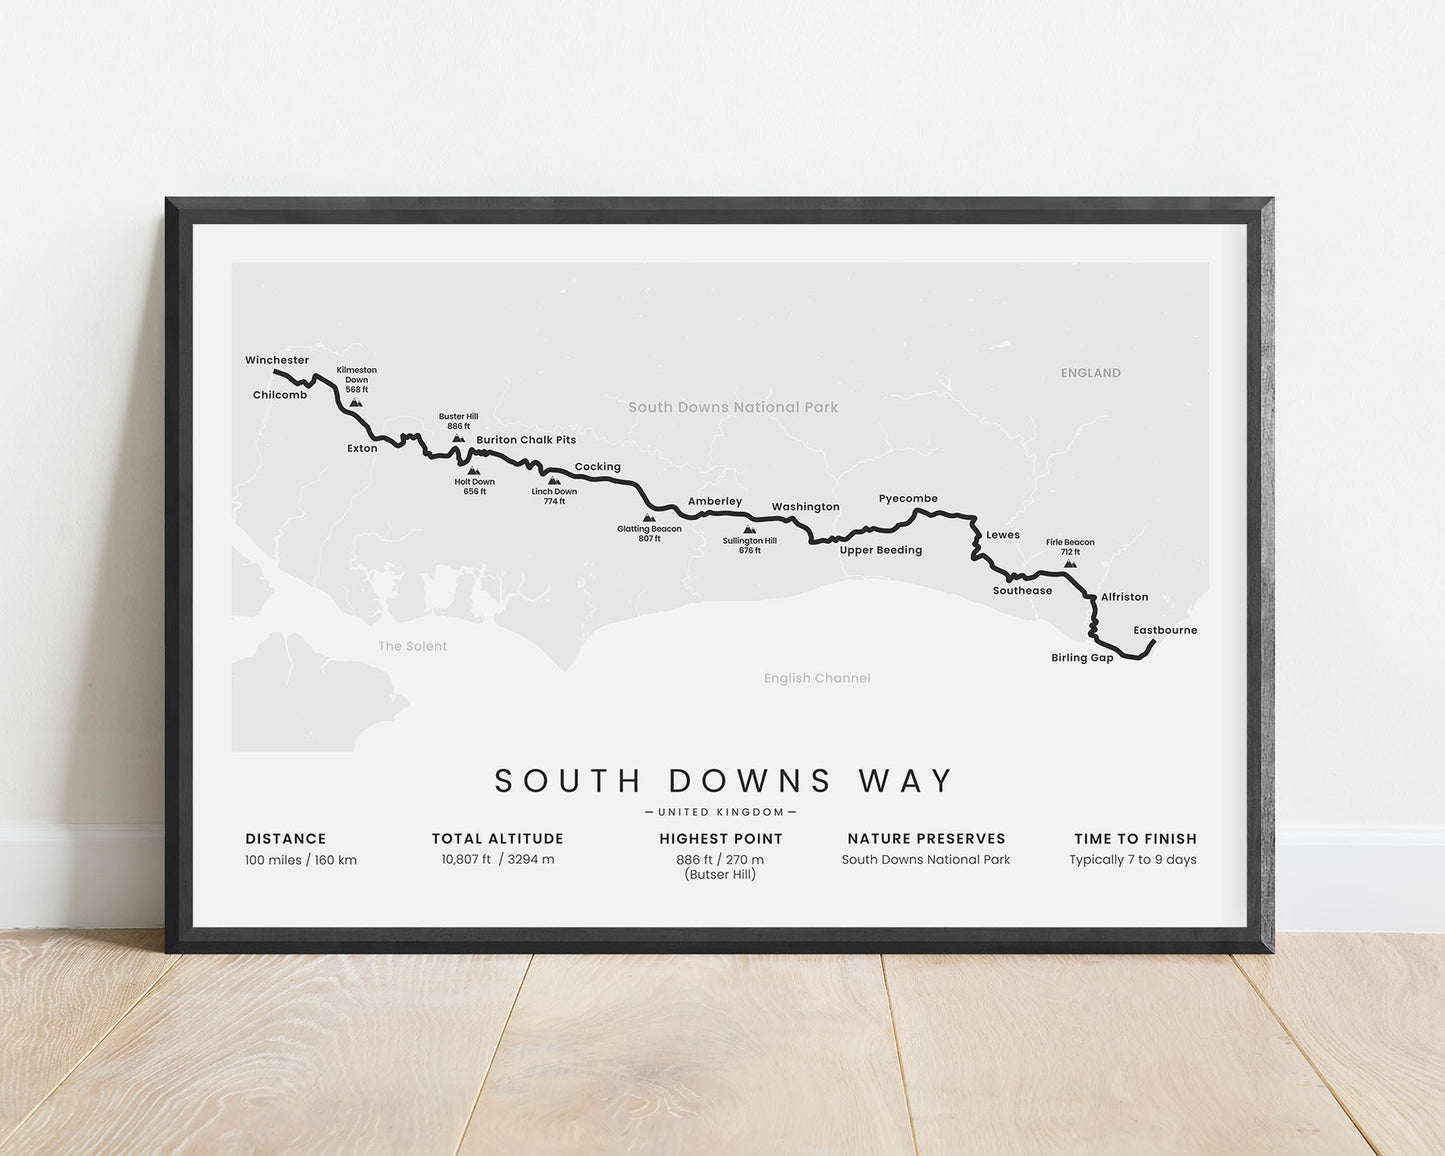 South Downs Way (South Downs National Park) path poster with white background